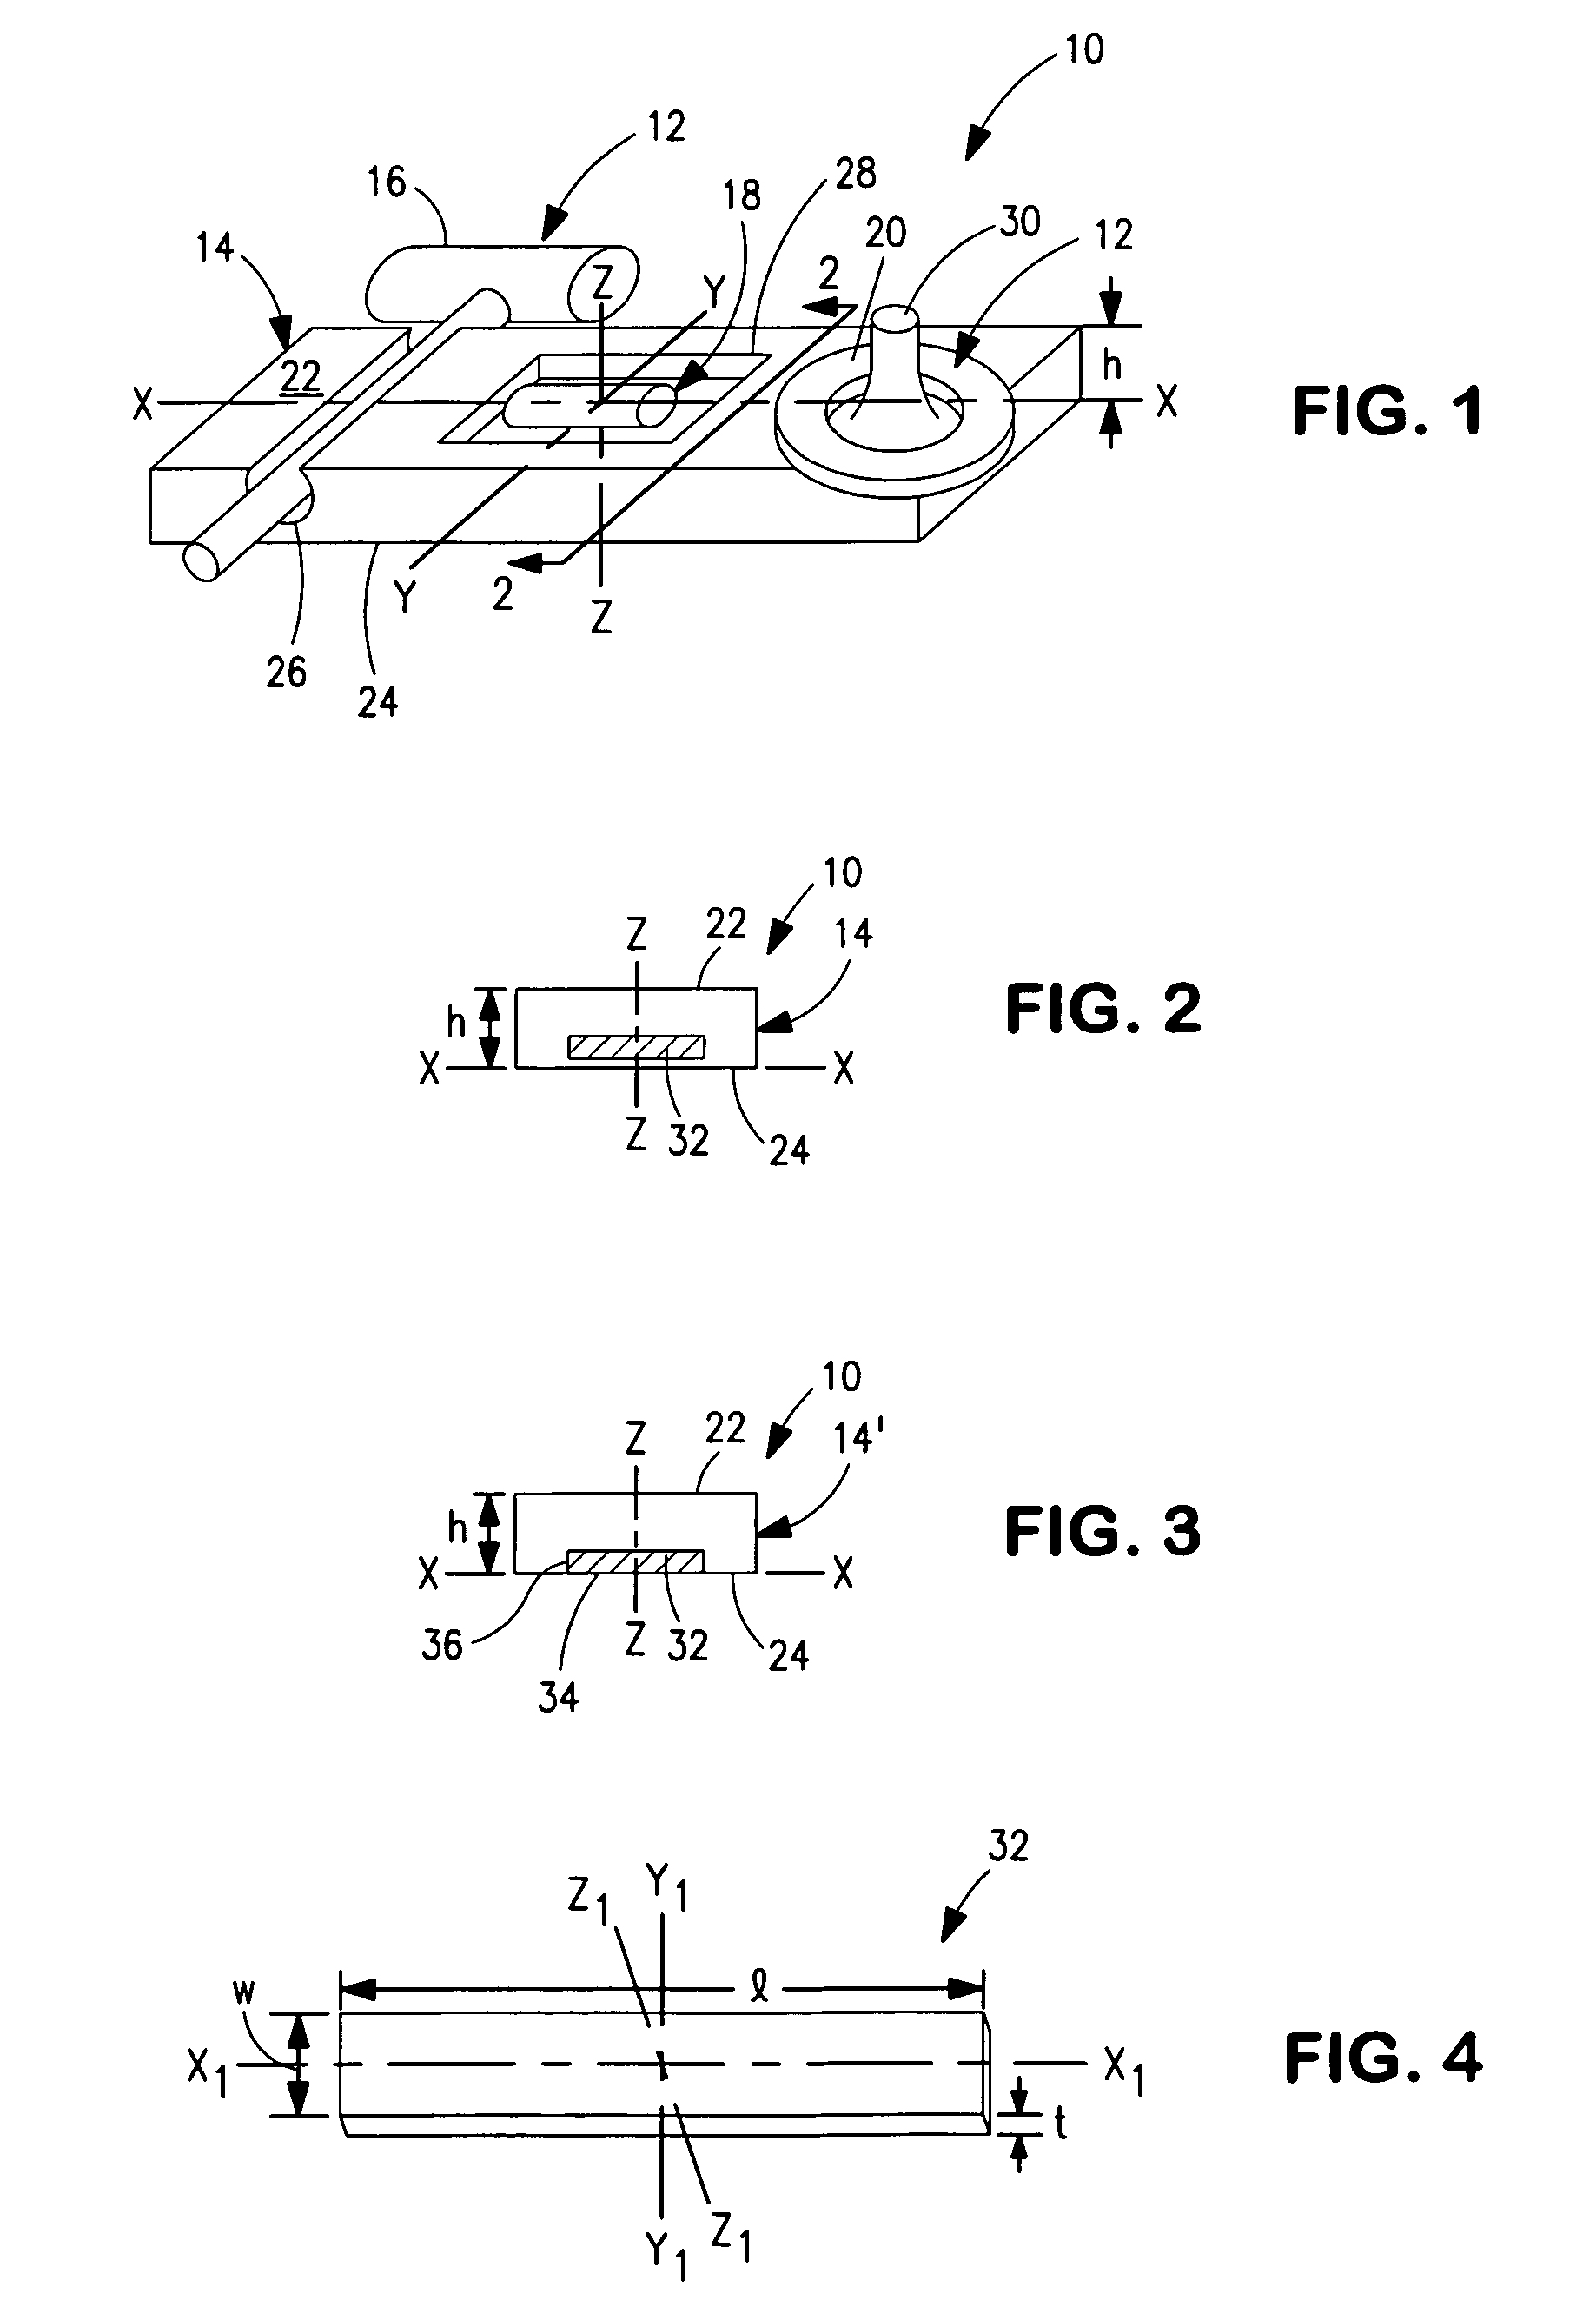 Magnetic storage device and a method of assembling the device